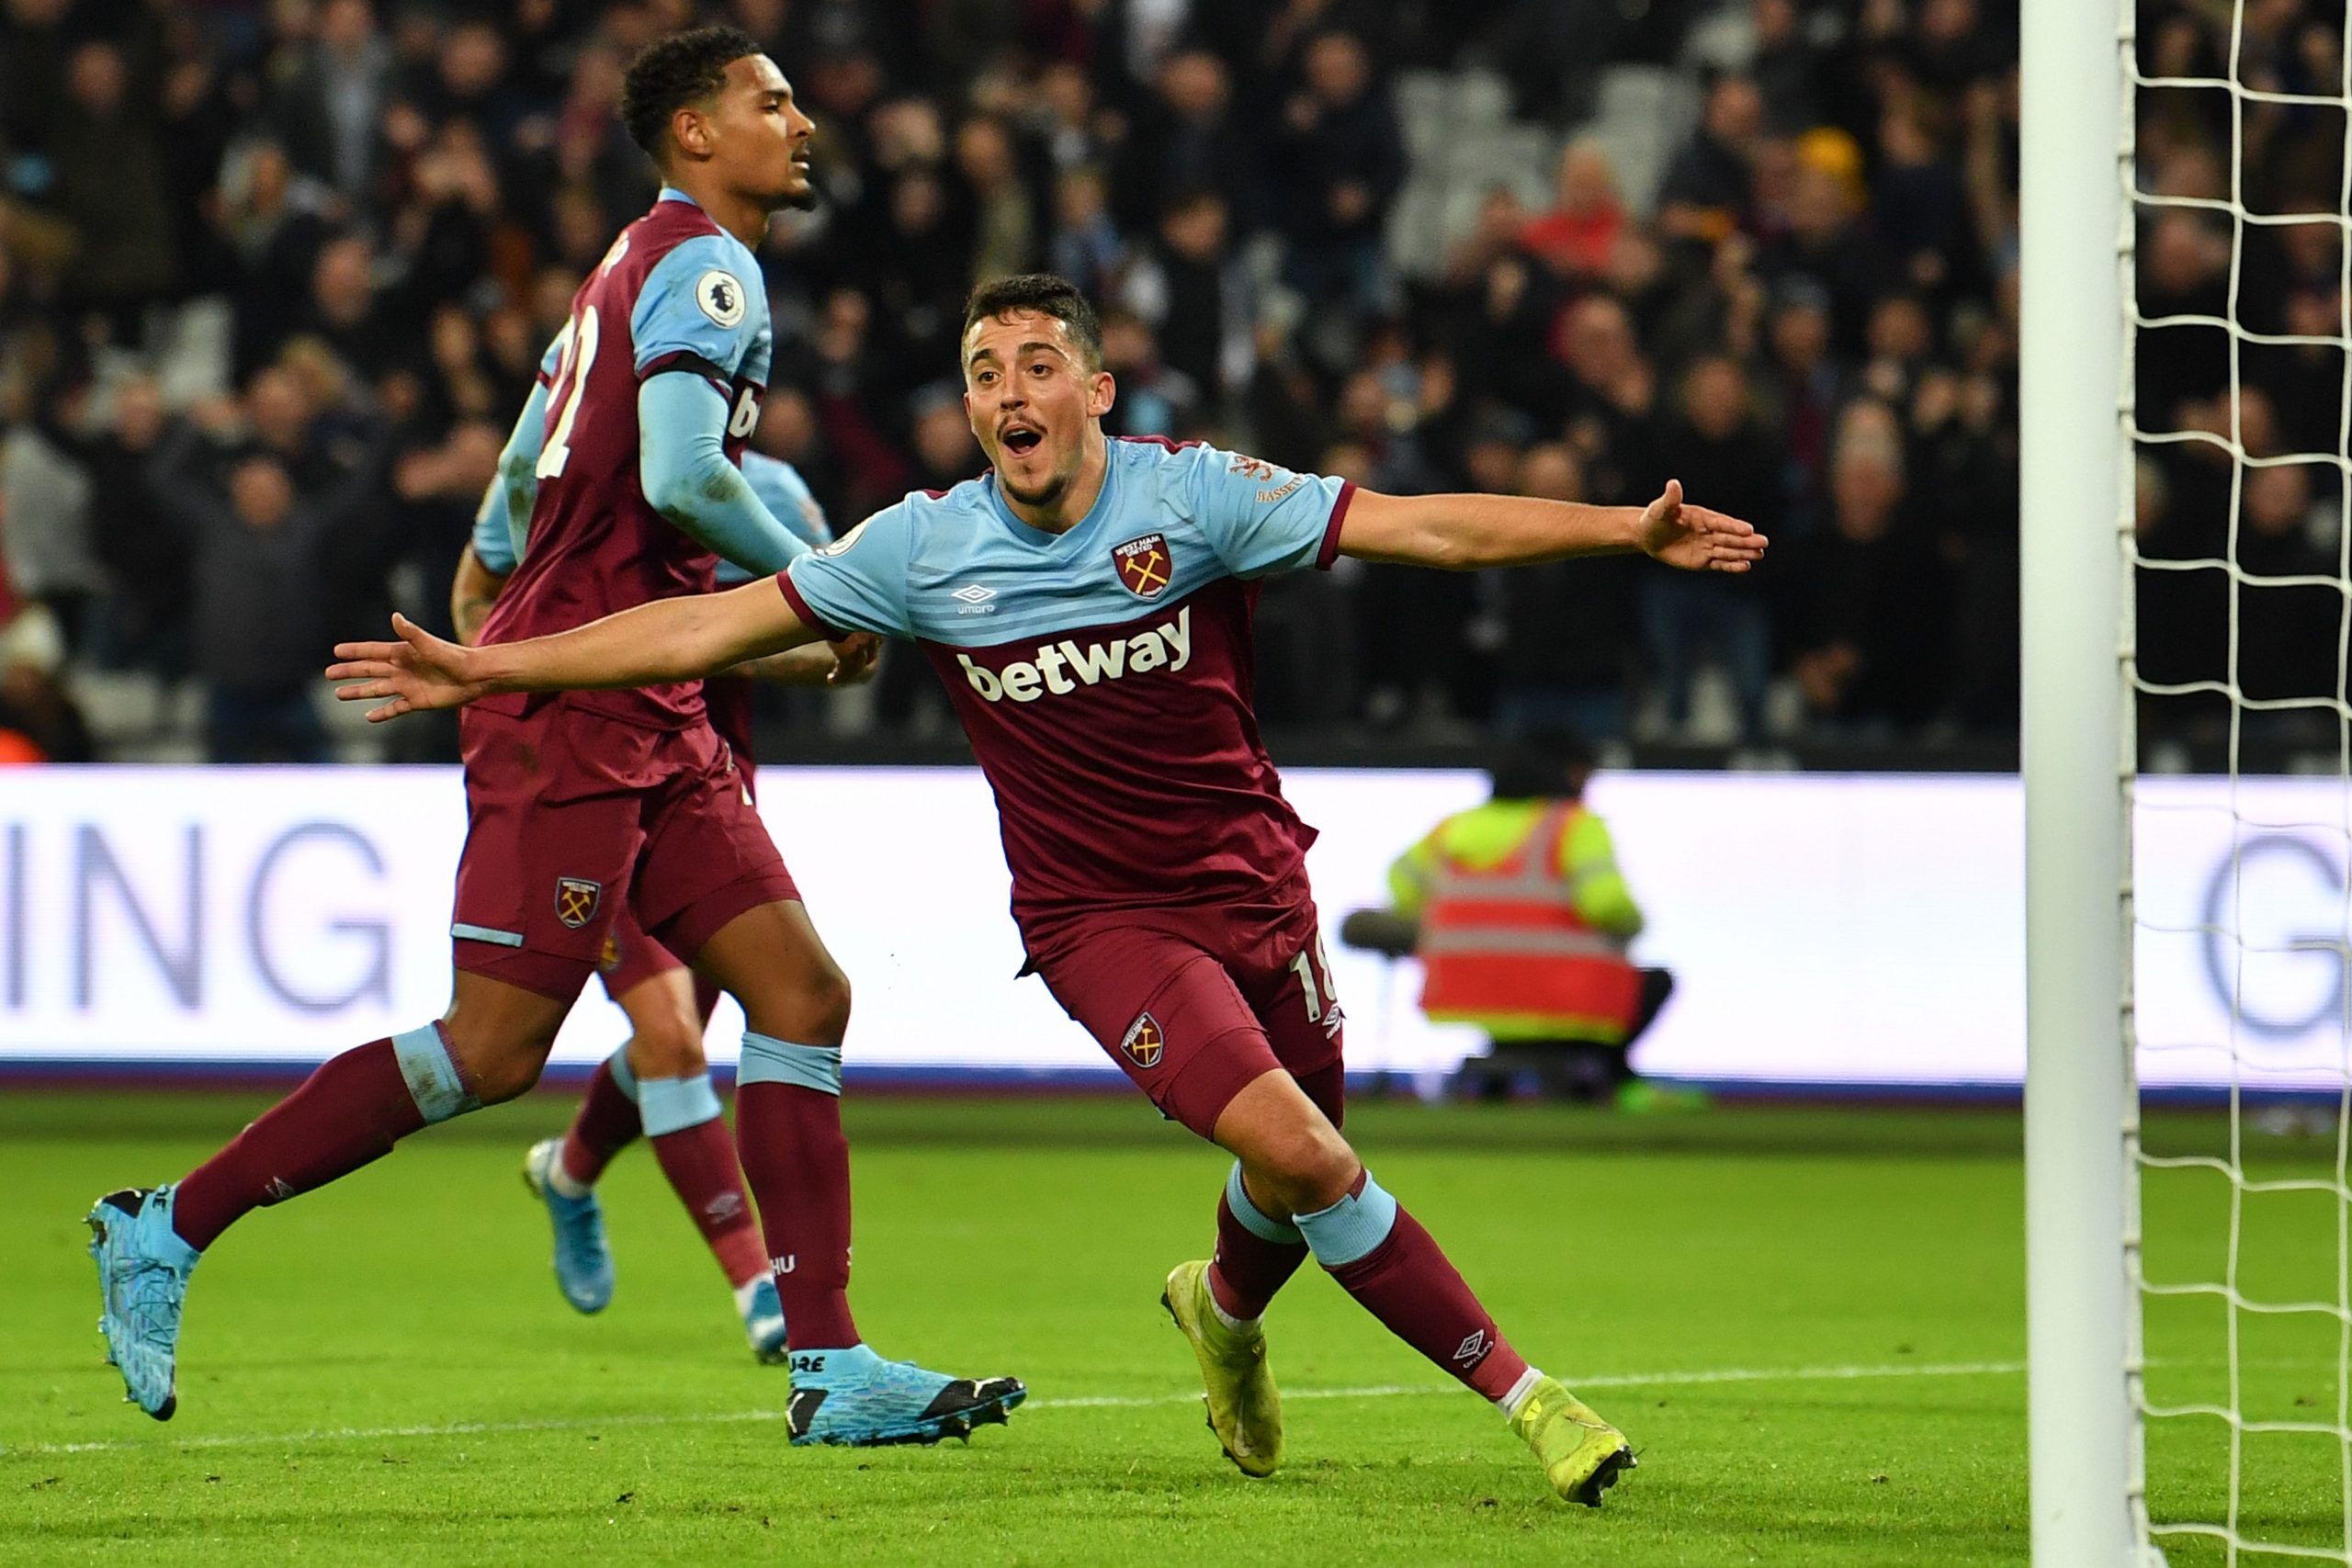 Pablo Fornals (R) celebrates after scoring a goal (Getty Images)